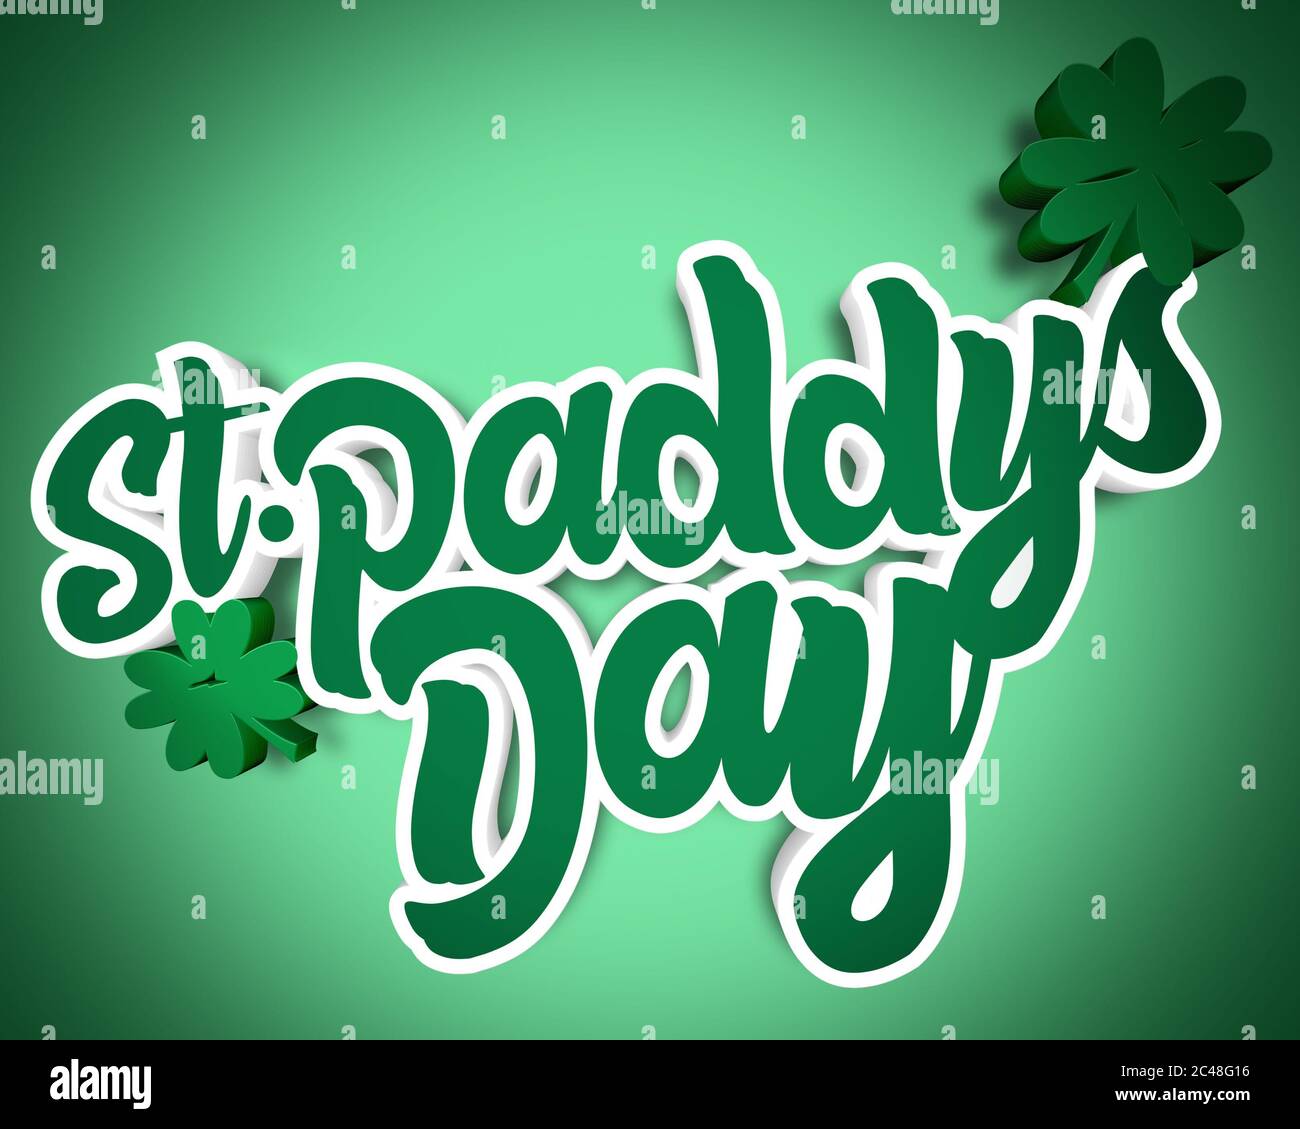 3D Saint Patricks /st Paddys day typography on green background with shamrock 4 leaf clovers Stock Photo